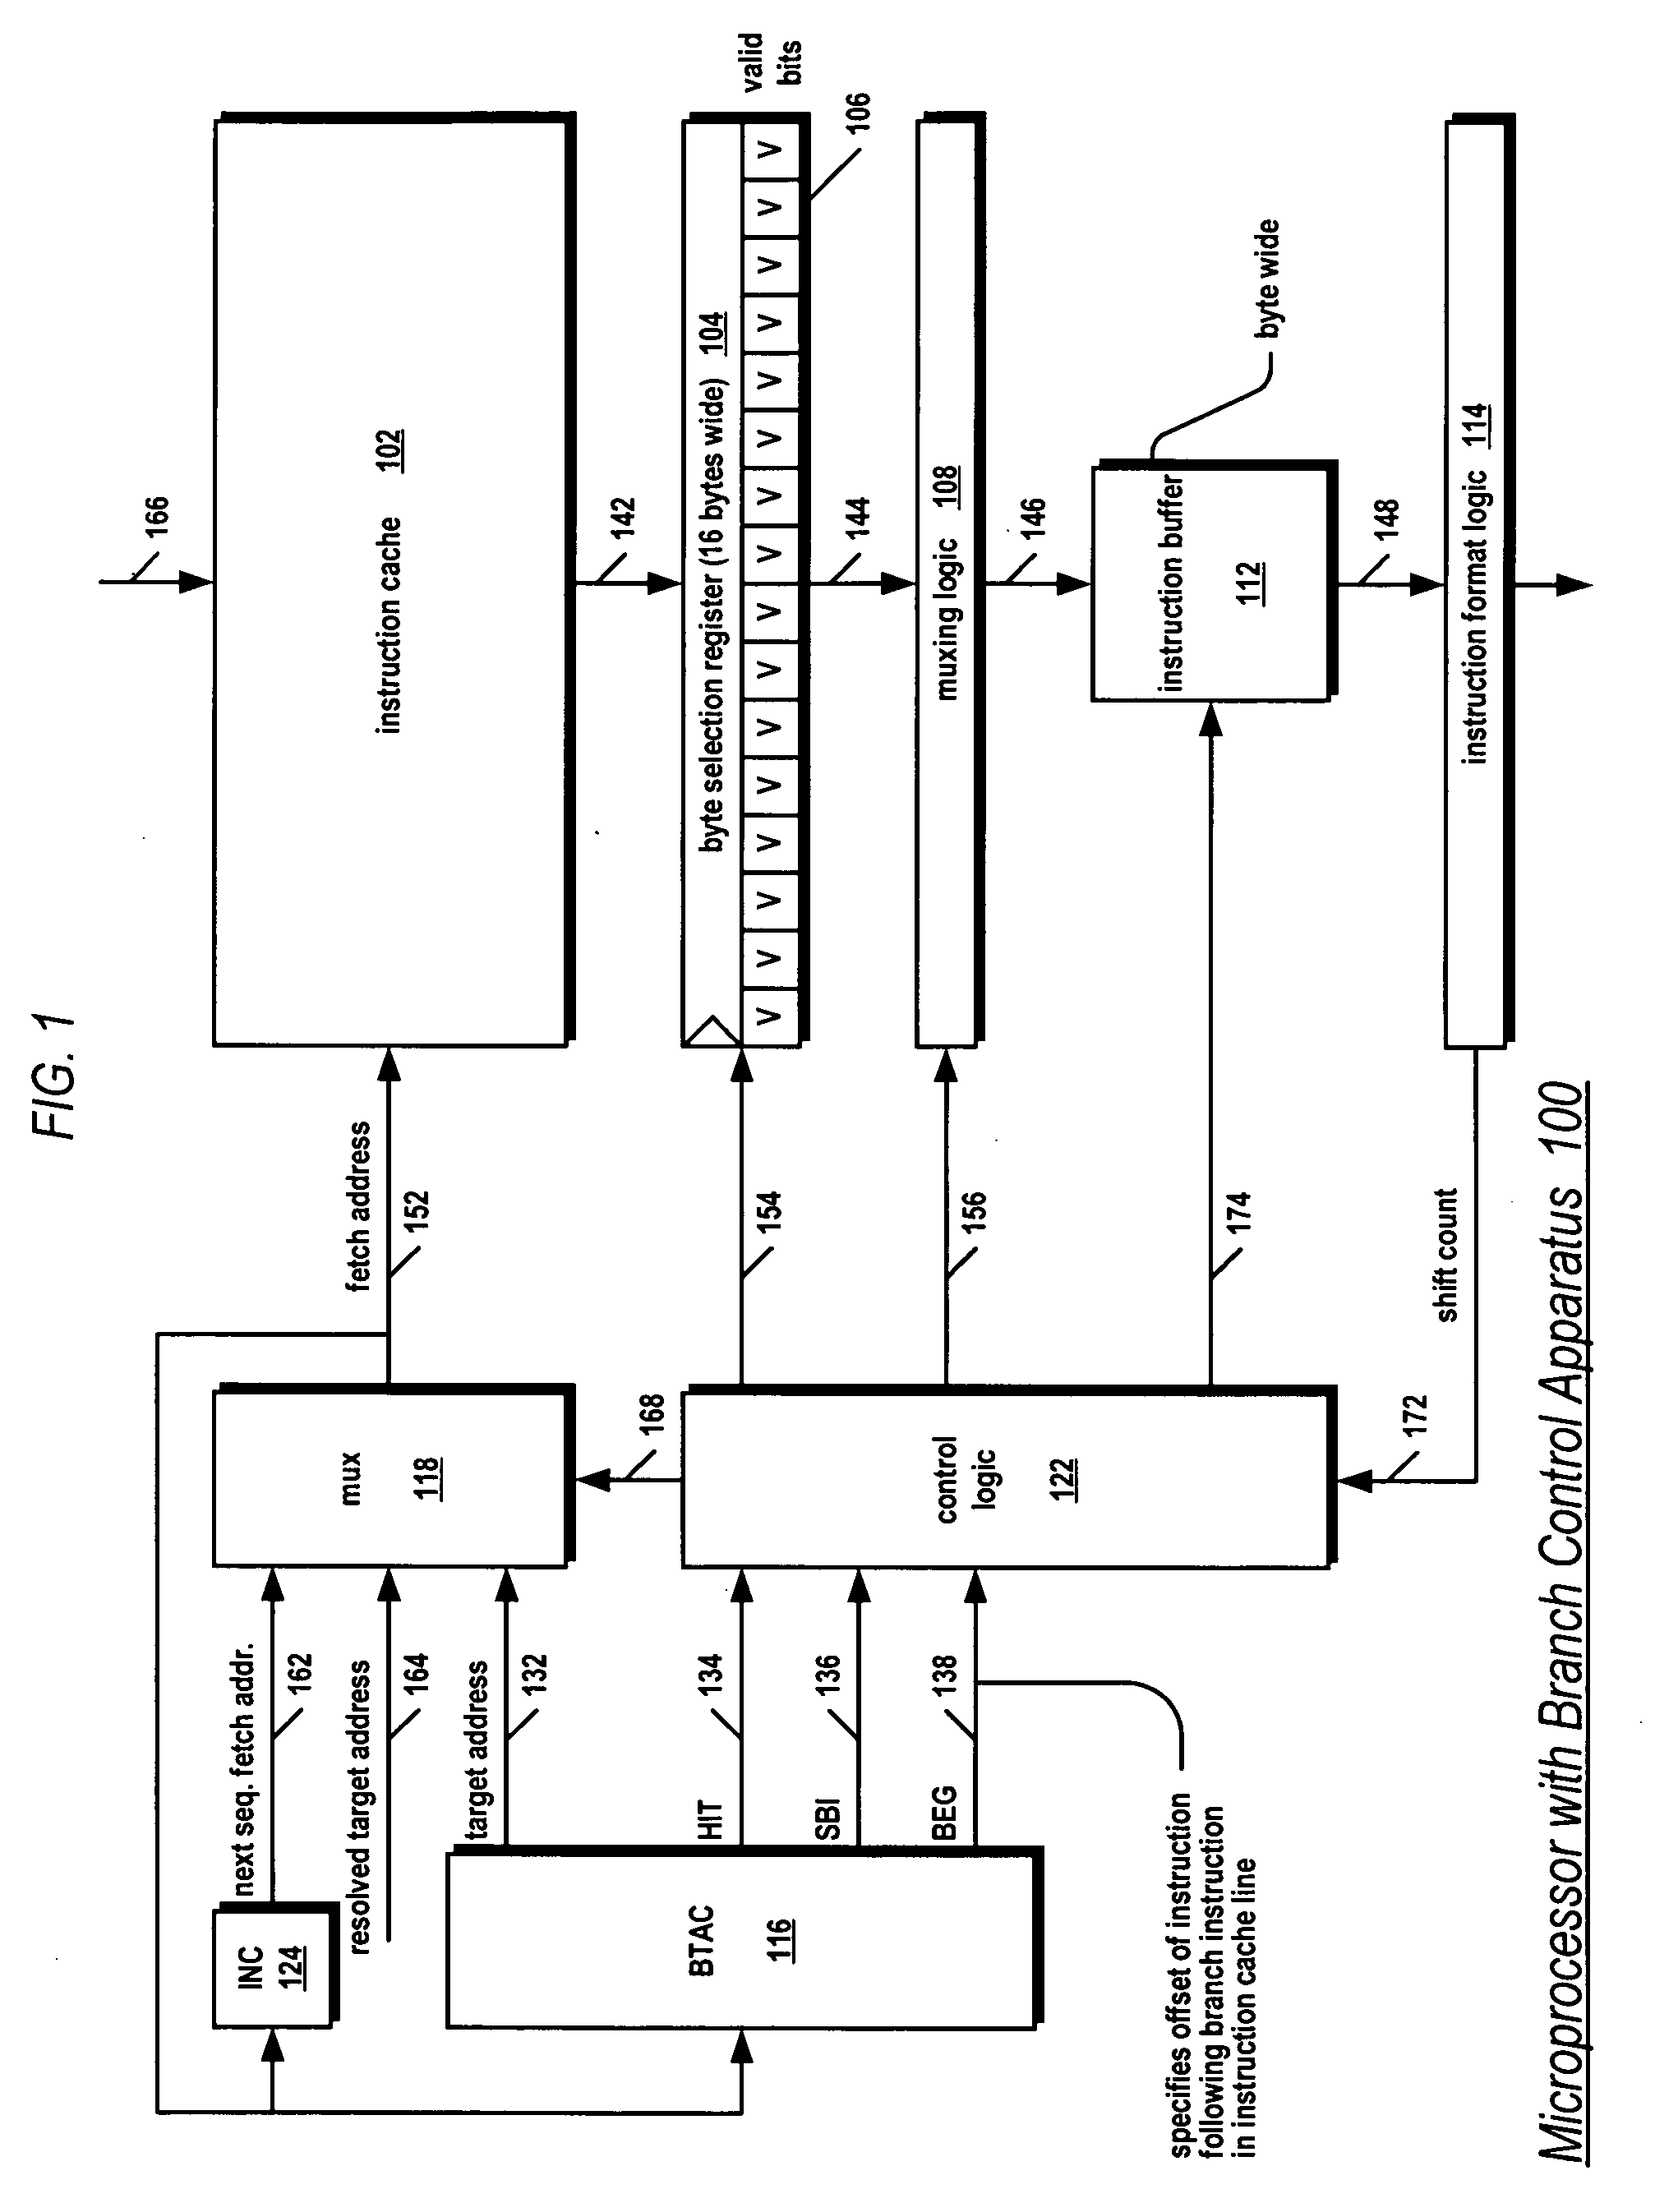 Apparatus and method for densely packing a branch instruction predicted by a branch target address cache and associated target instructions into a byte-wide instruction buffer